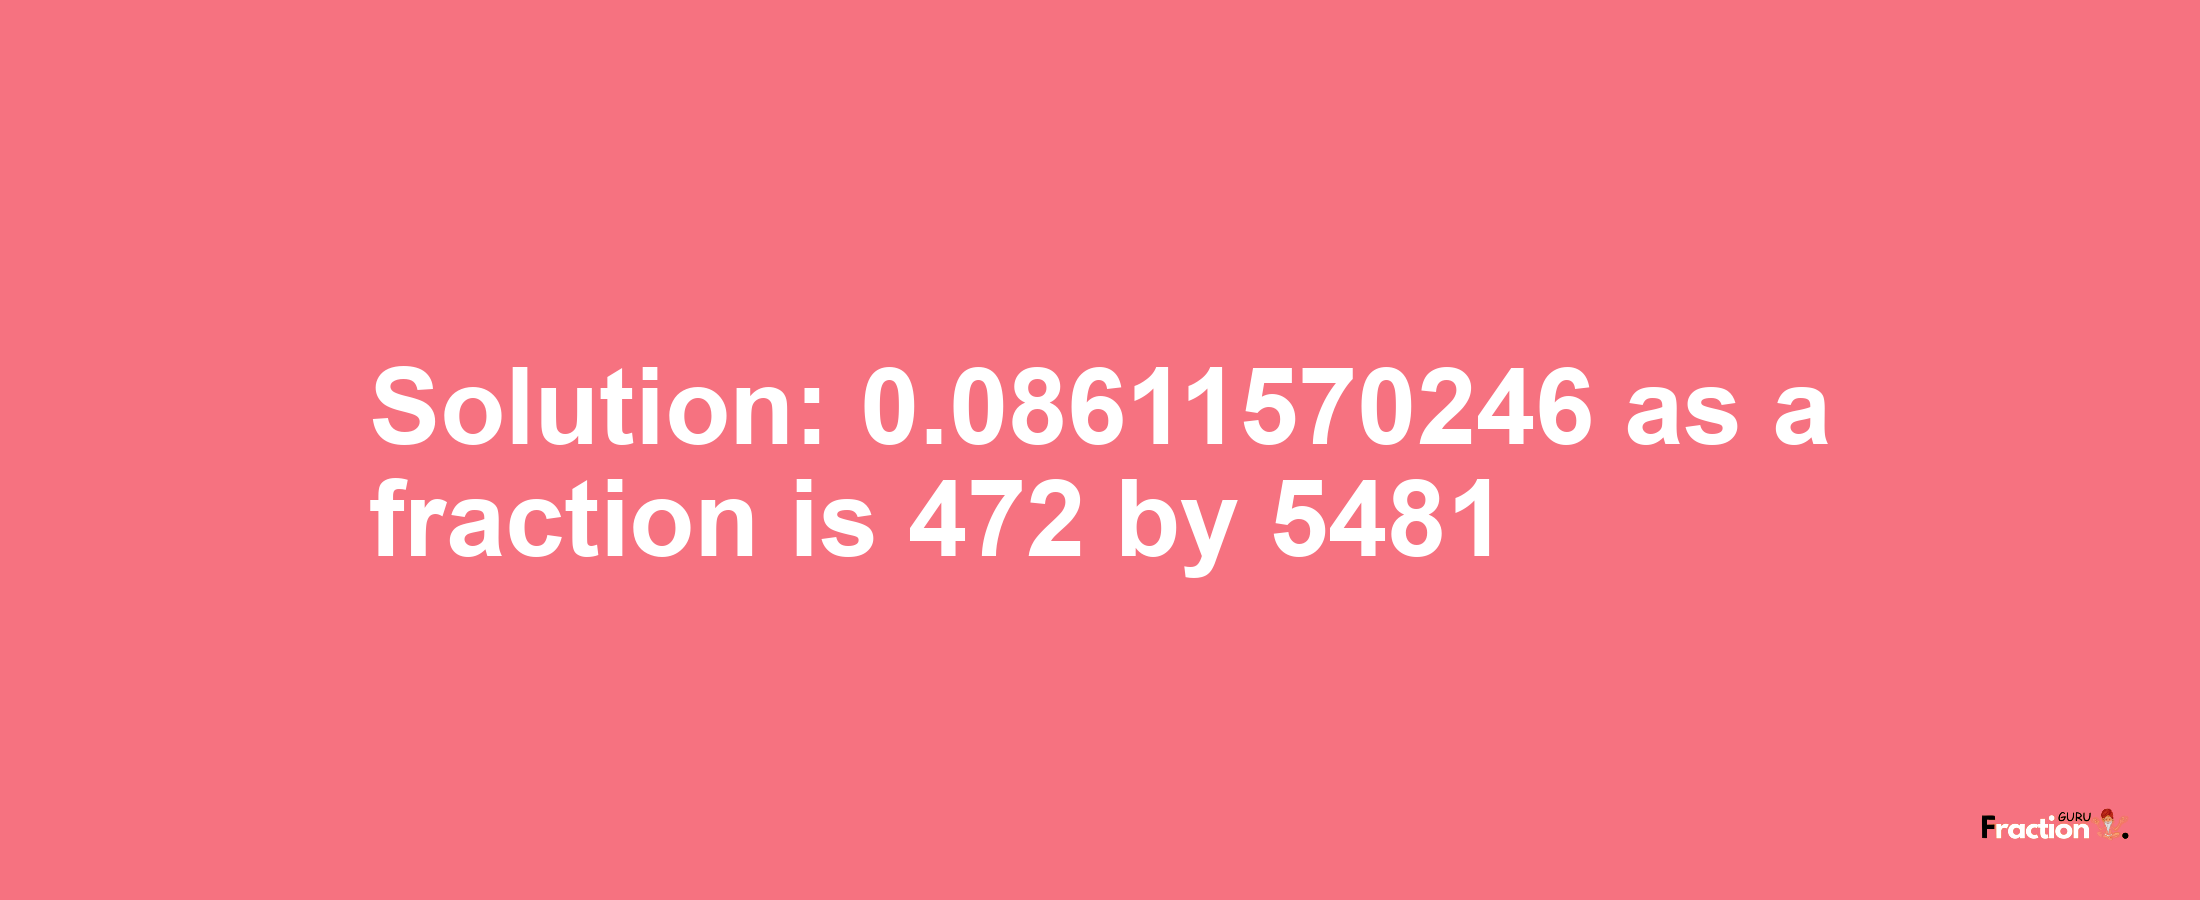 Solution:0.08611570246 as a fraction is 472/5481